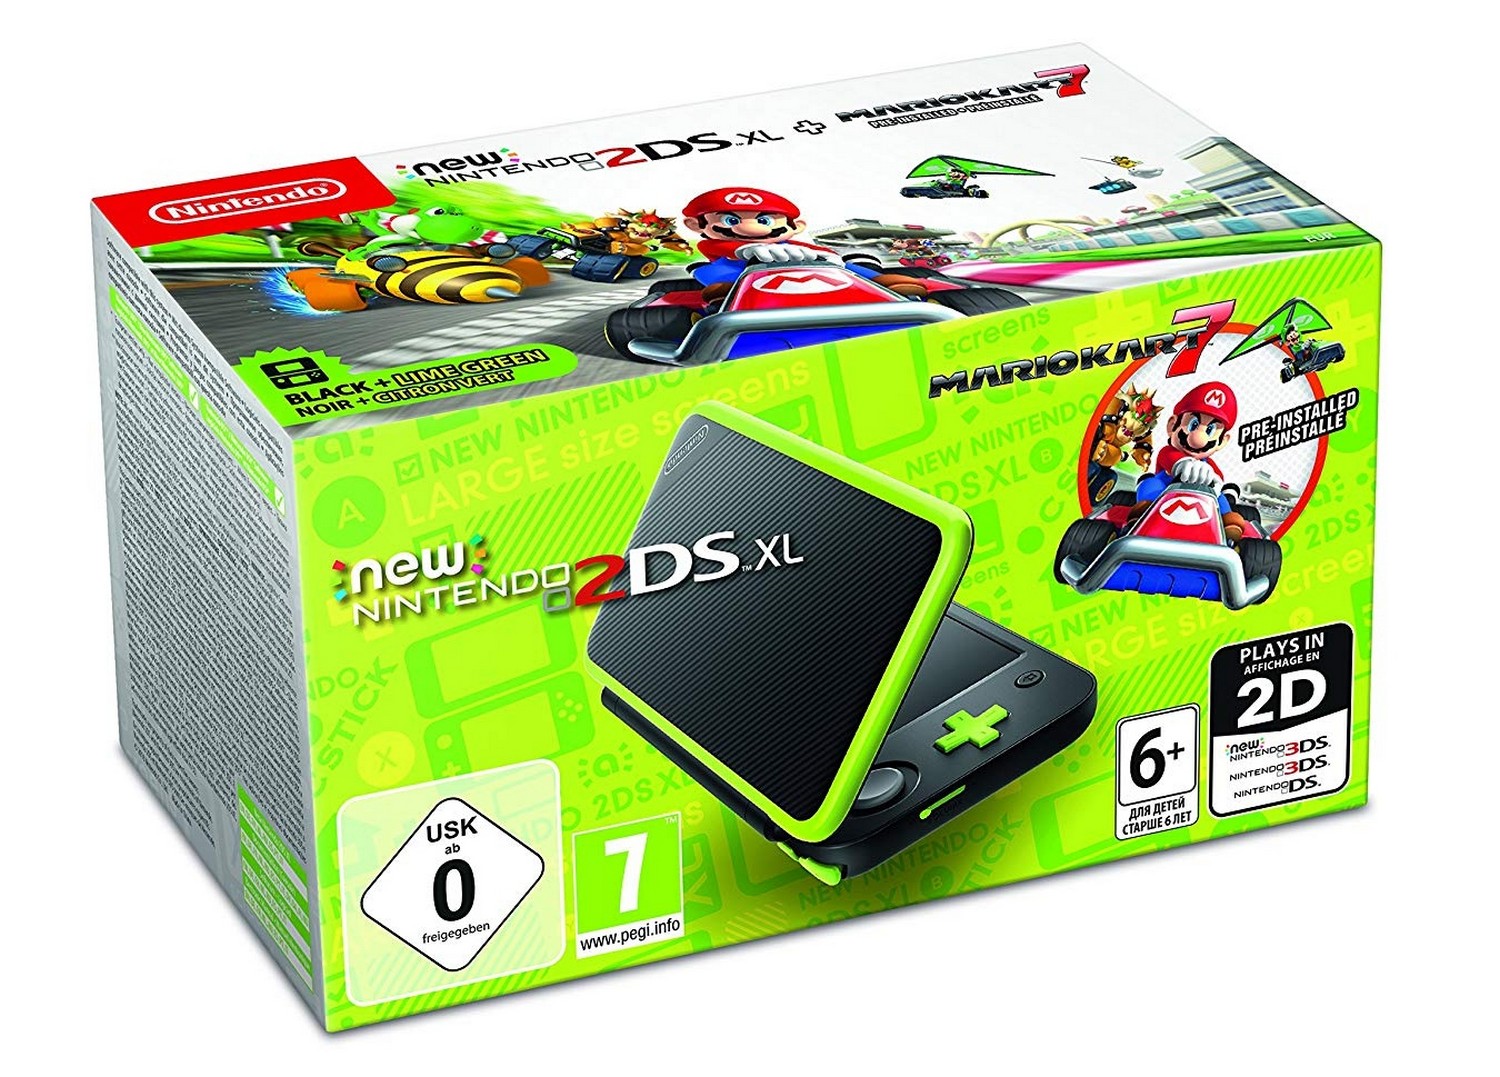 New 2DS XL - Black/Lime Green incl. Mario Kart 7